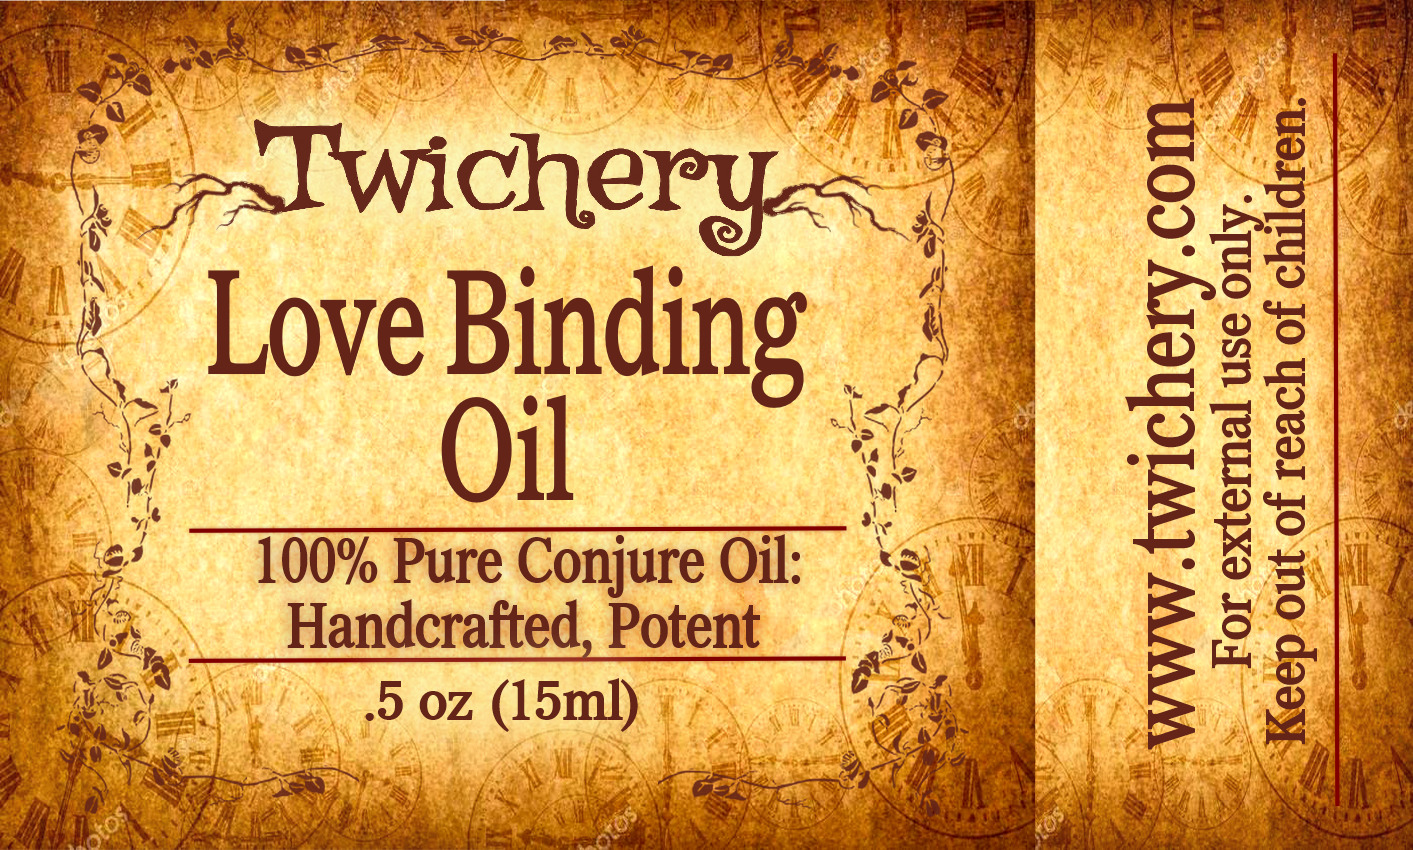 LOVE BINDING OIL, Bind a person's love to you FOREVER, Hoodoo FROM TWICHERY